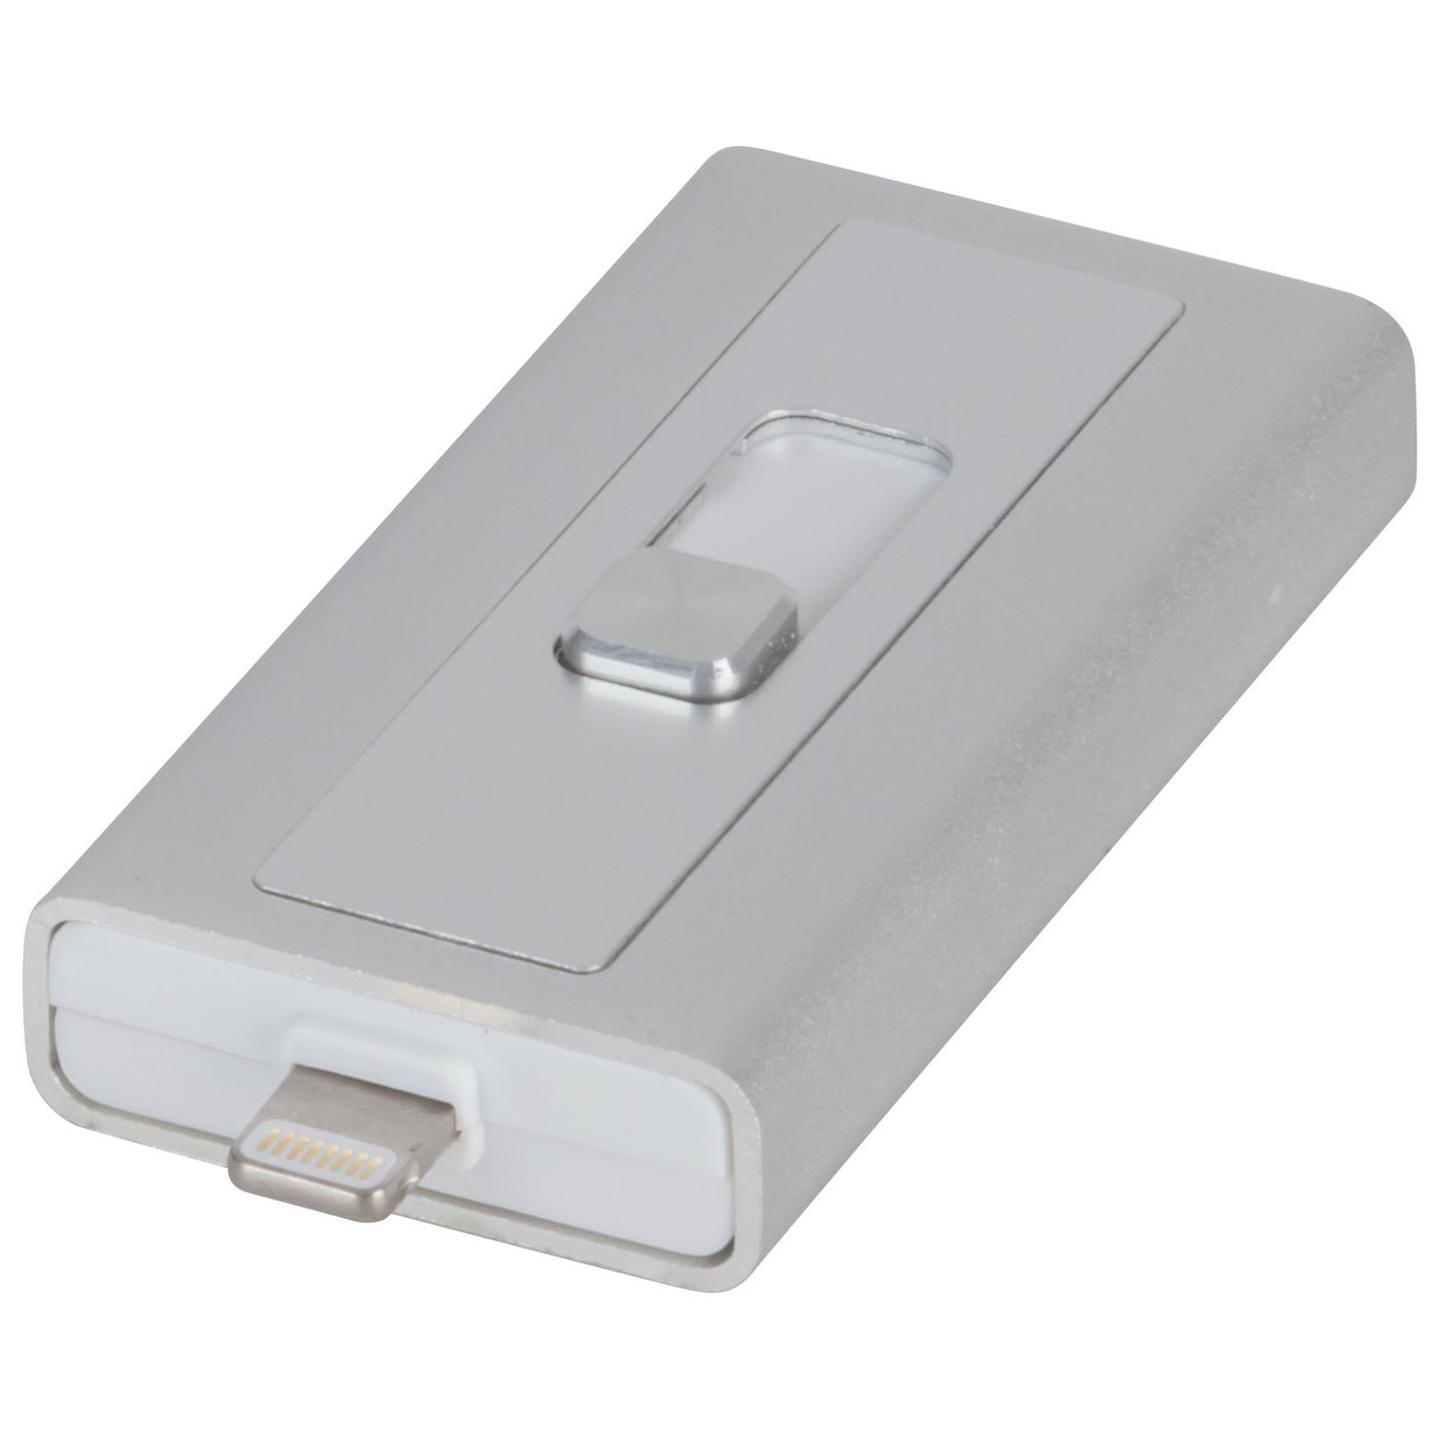 USB Flash Drive with Lightning Connector